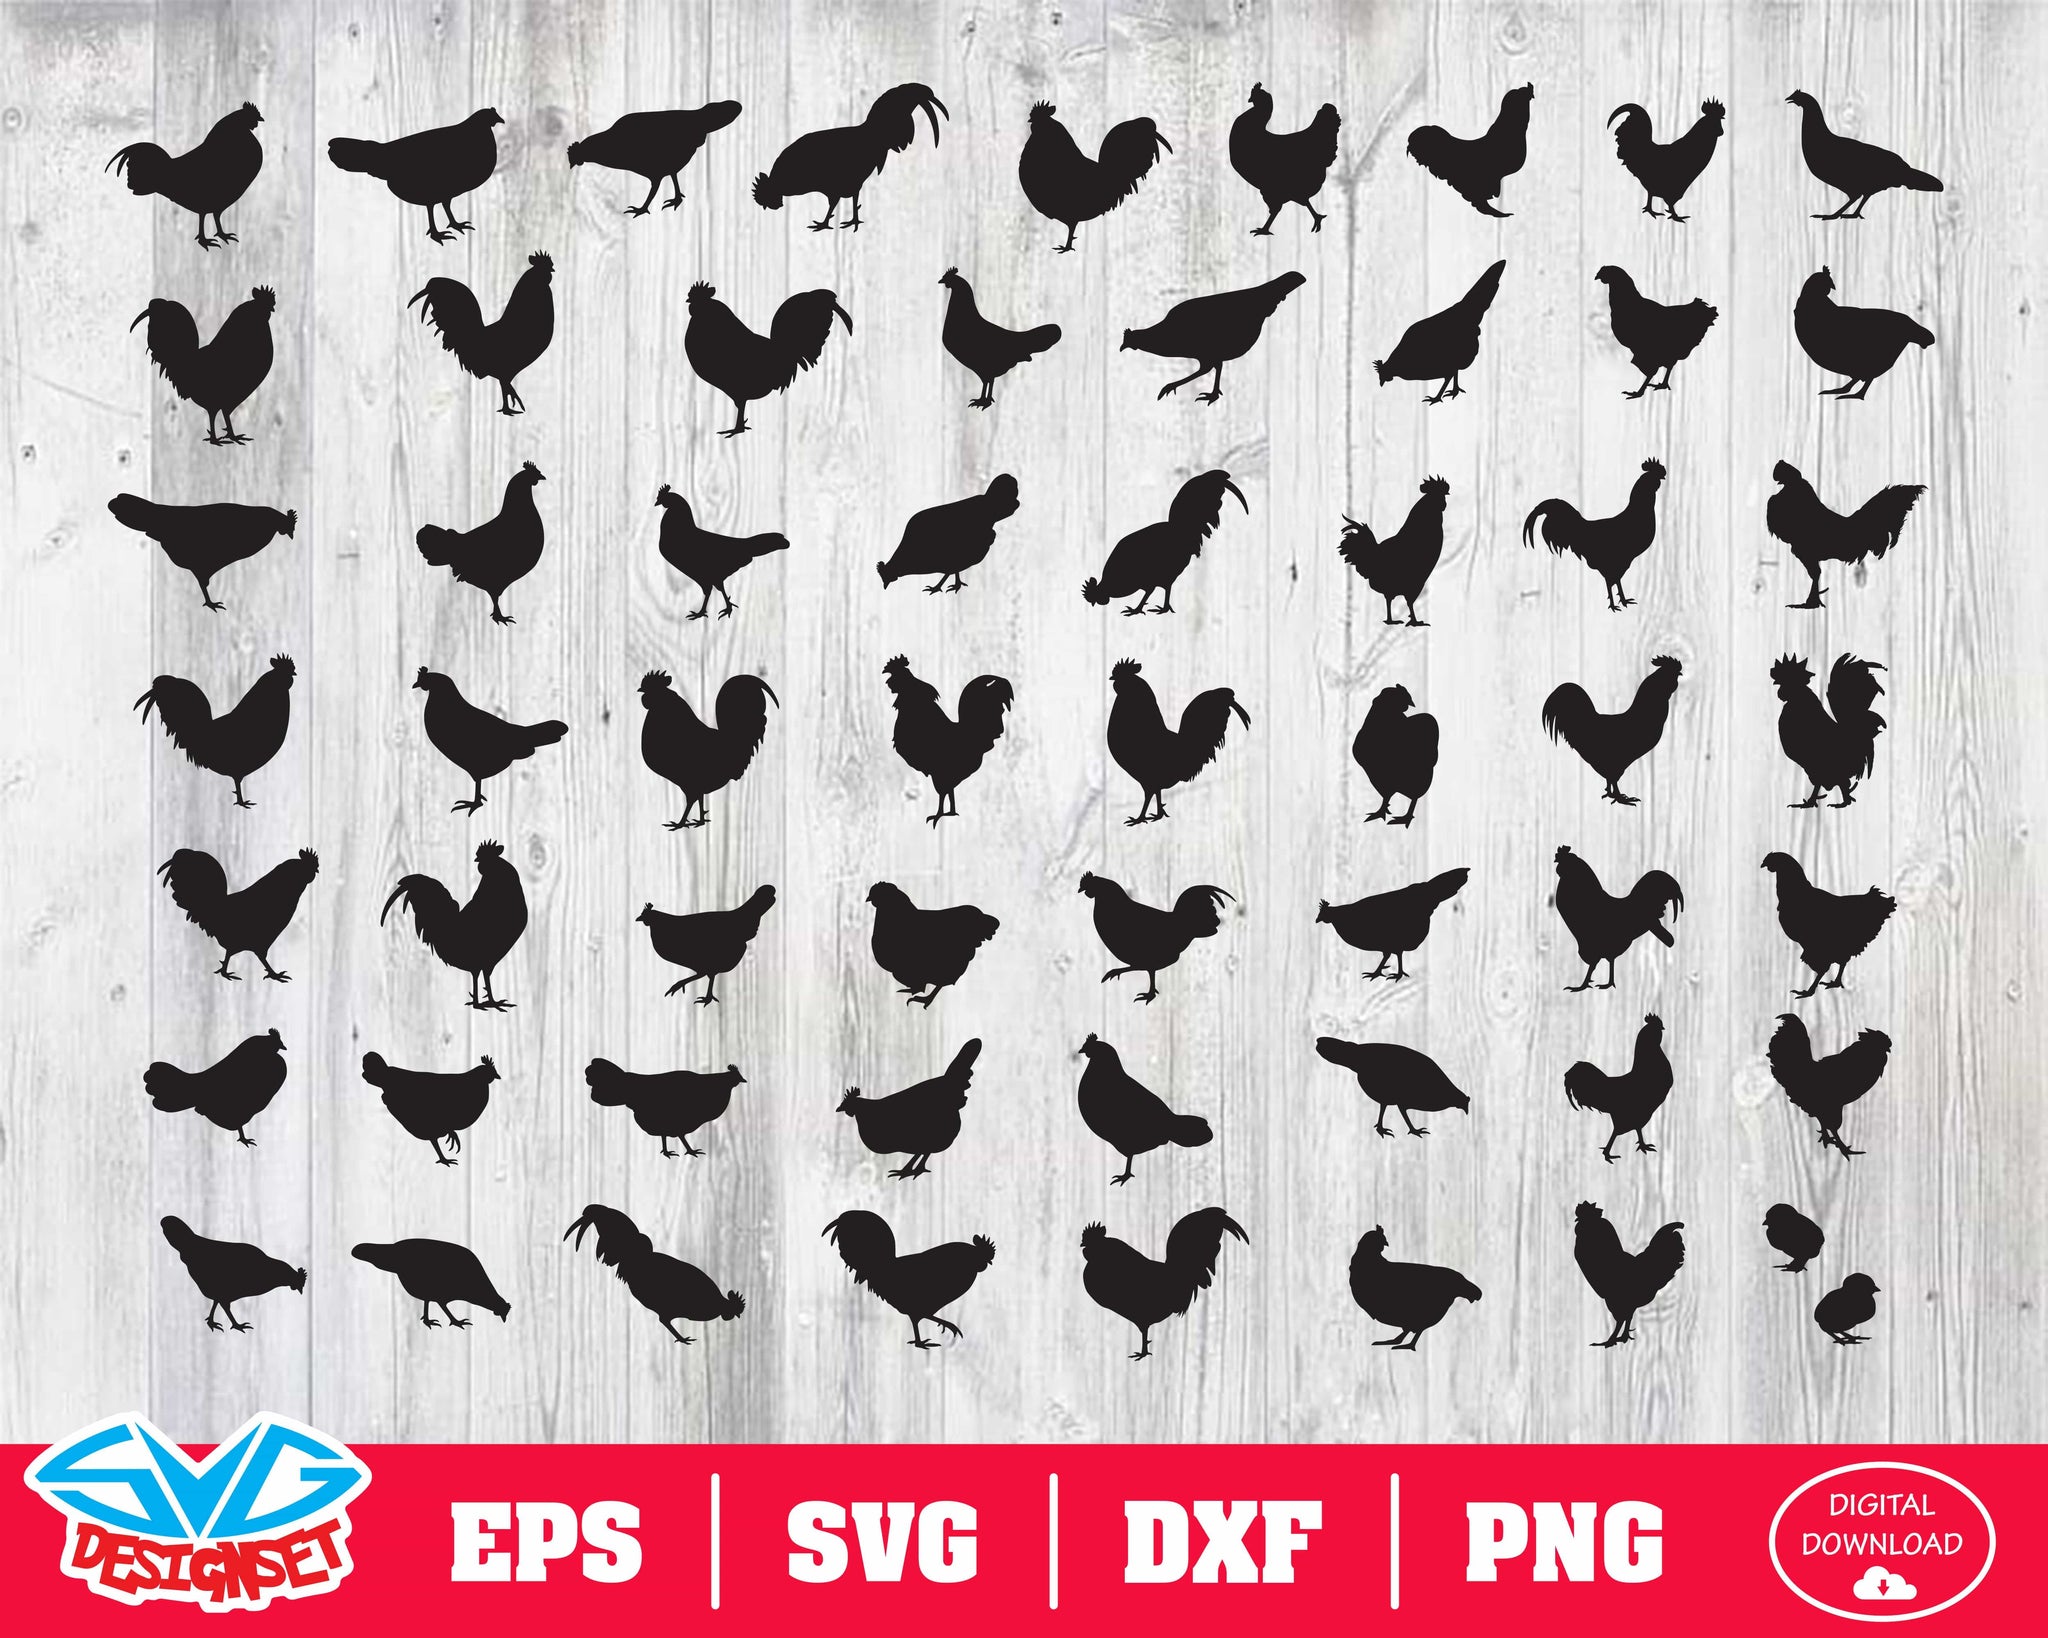 Chicken Svg, Dxf, Eps, Png, Clipart, Silhouette and Cutfiles - SVGDesignSets